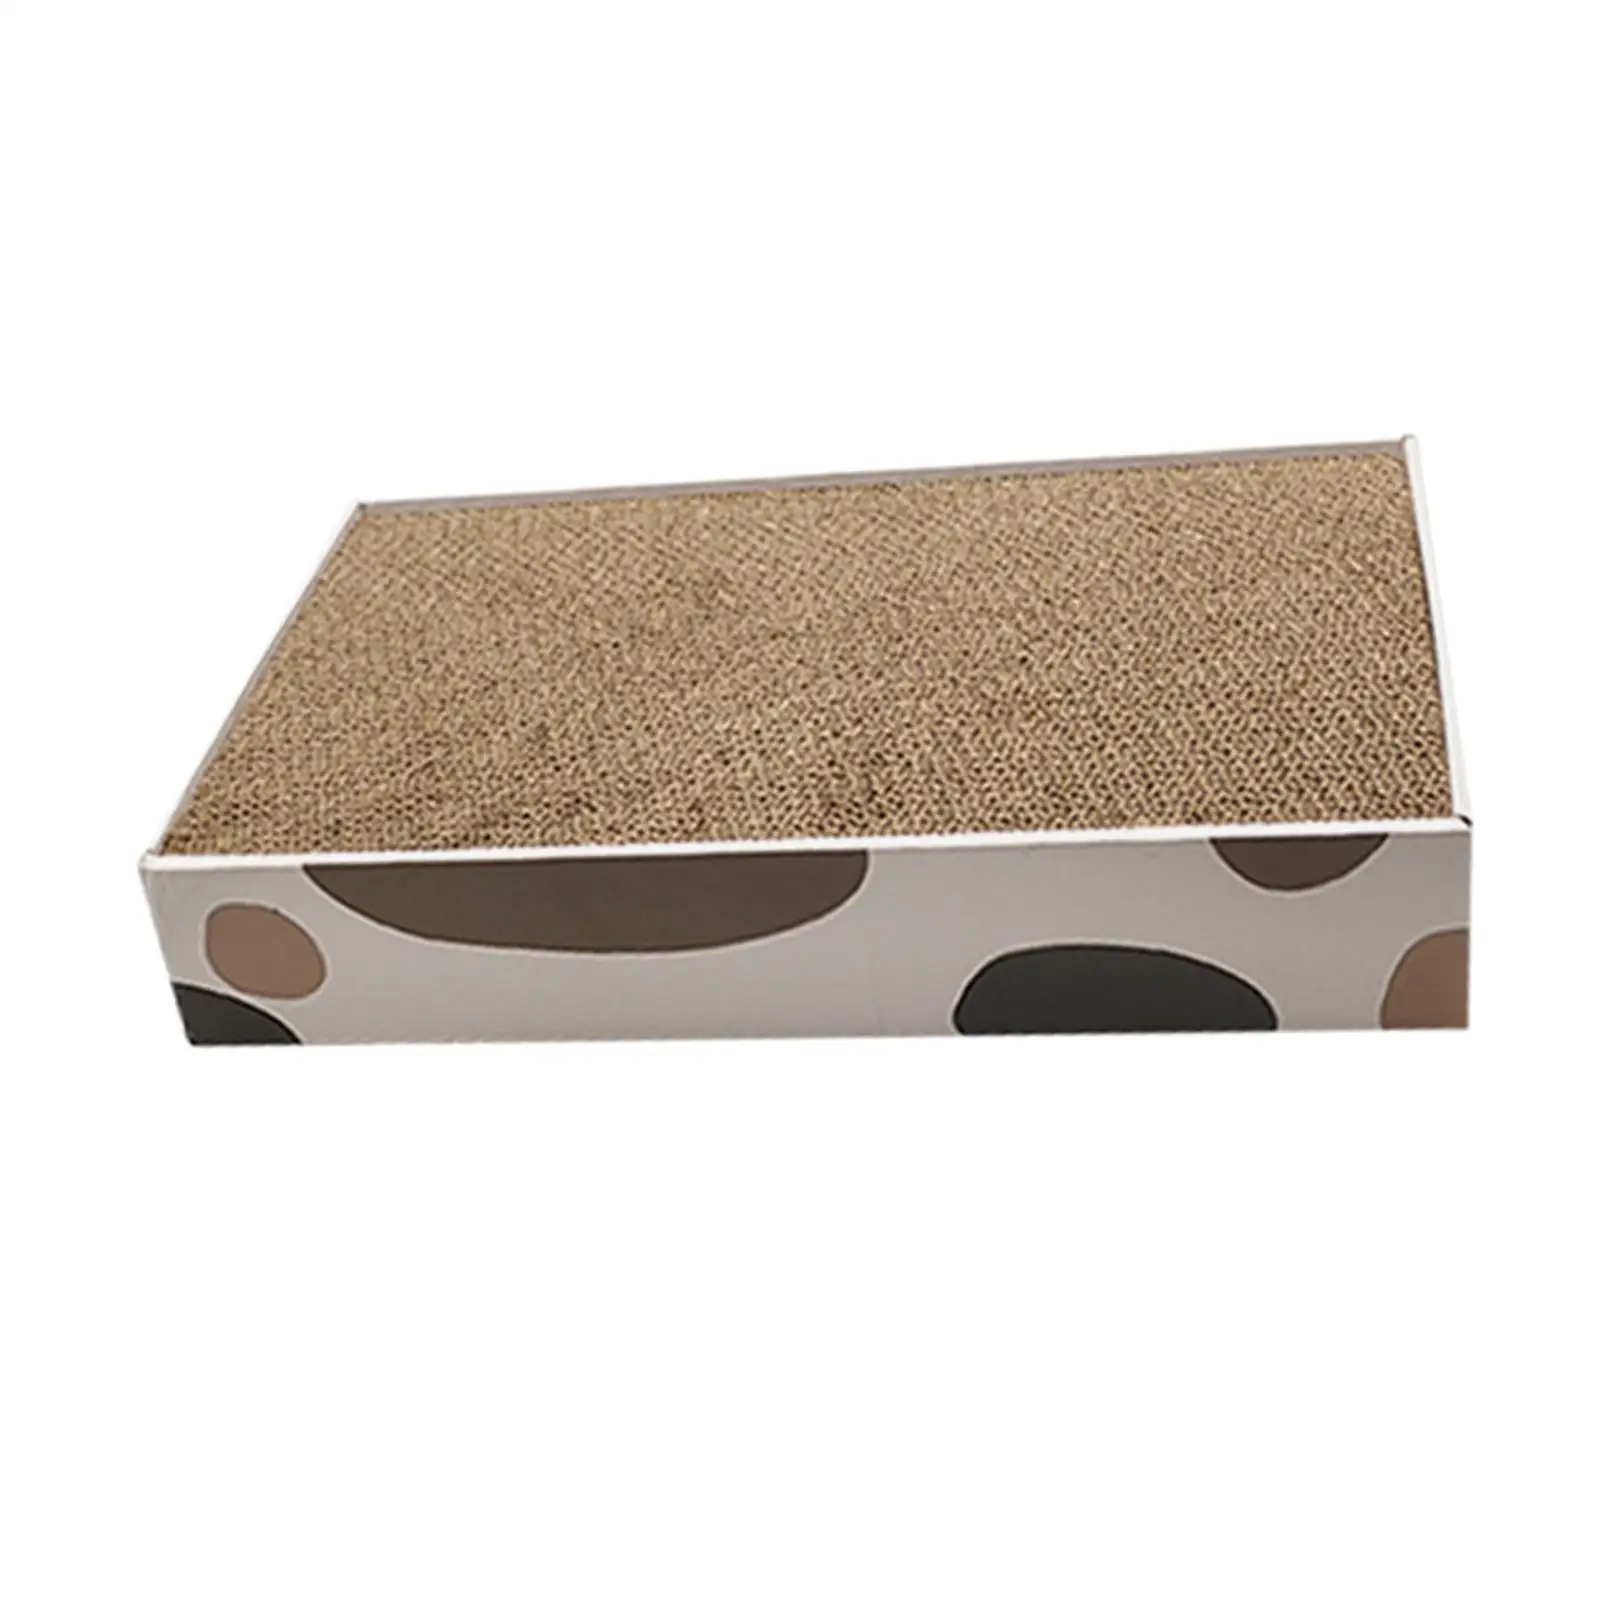 Cat Scratcher Scratching Pads with Box Corrugate Paper Interactive Play Toy